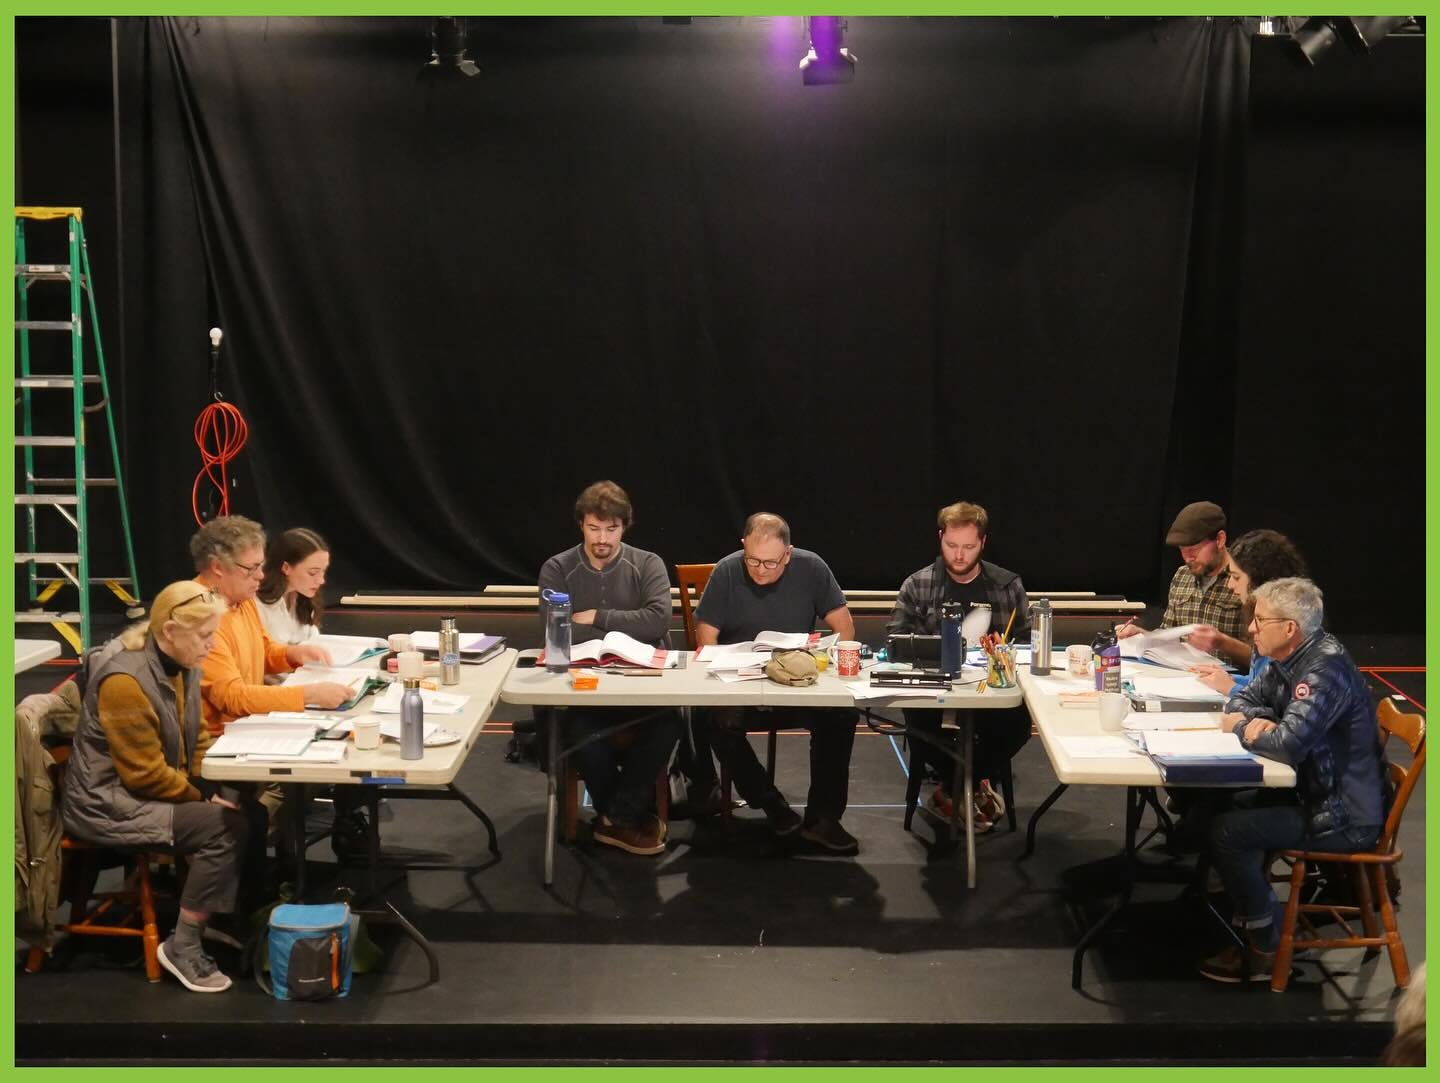 &quot;Oh, thanks be to fu*ck,&quot; she said. 
First rehearsal is now underway for WHO'S DEAD MCCARTHY: STORIES BY KEVIN BARRY!

We are so excited to have an amazing cast, crew, and designers join us for these three beguiling short stories, featuring